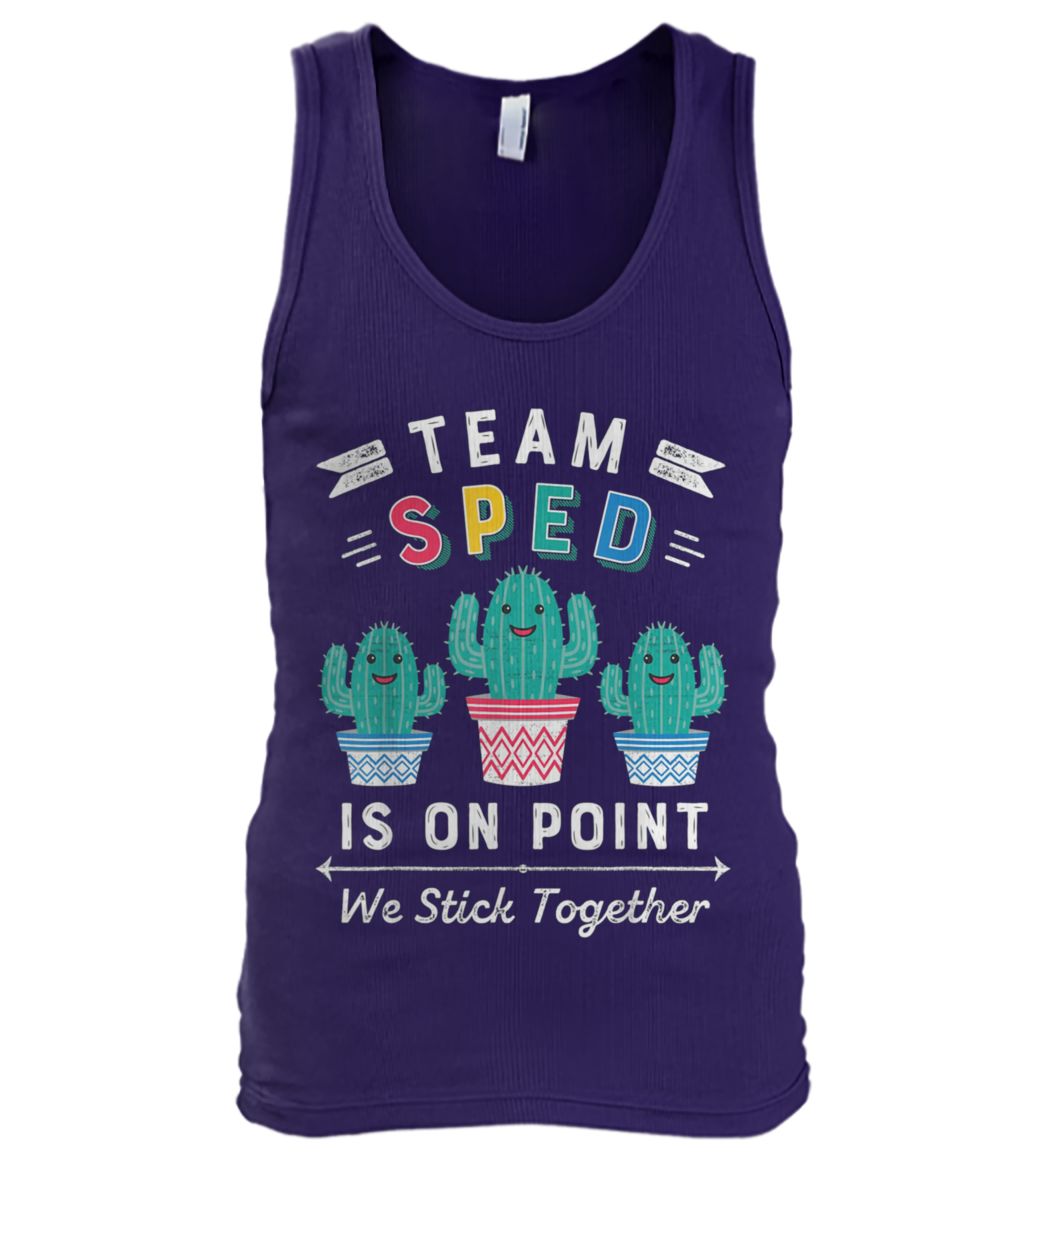 Team sped is on point we stick together men's tank top